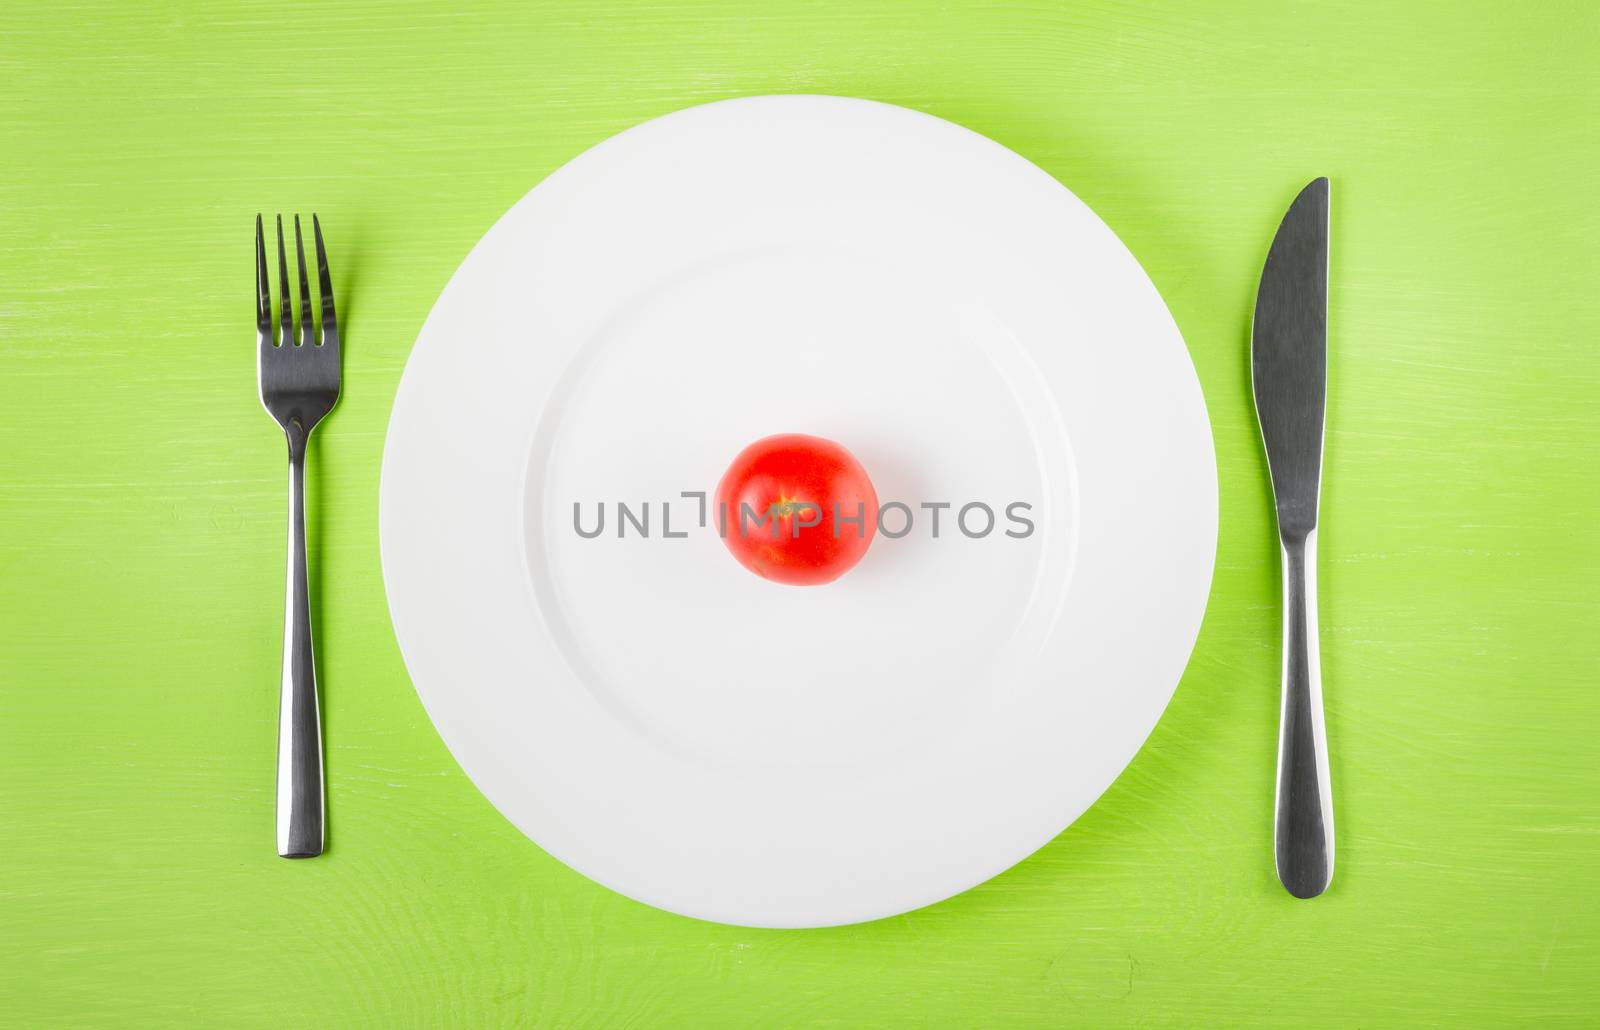 the concept of dietary restrictions, healthy lifestyle, diet,  weight loss, anti-obesity, healthy diet. Small tomato on a plate, knife, fork on the table, top view